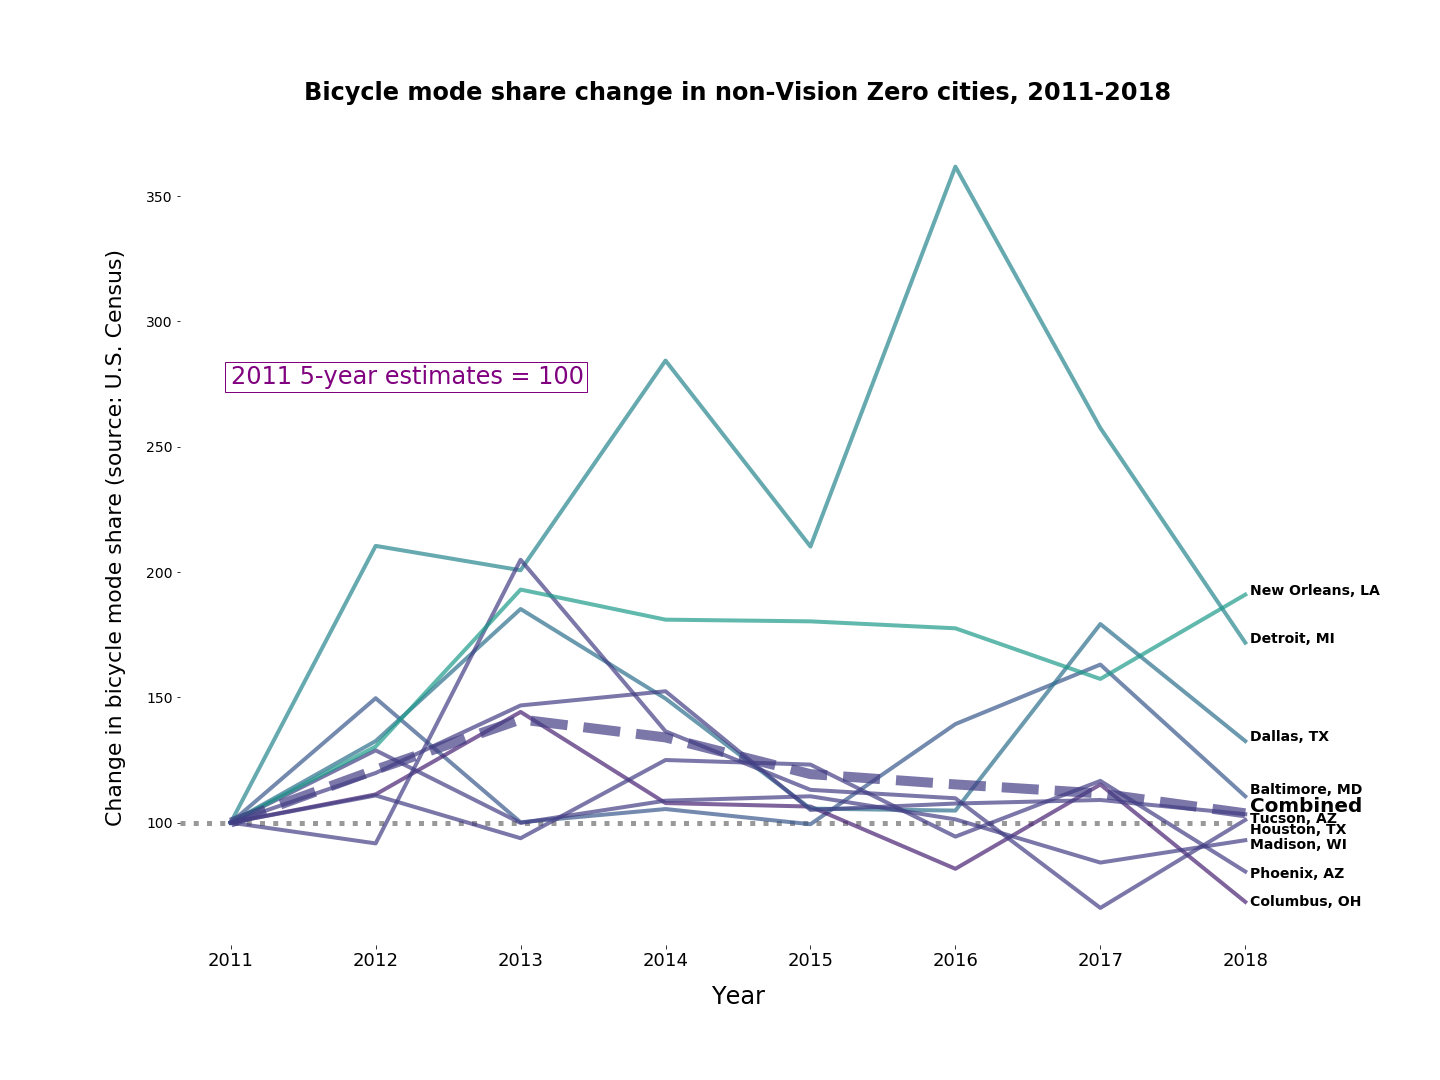 Chart showing cycling rates from 2011-2018 in nine selected non-Vision Zero cities. The chart slightly rises from 2011-2013 but then returns to the baseline.